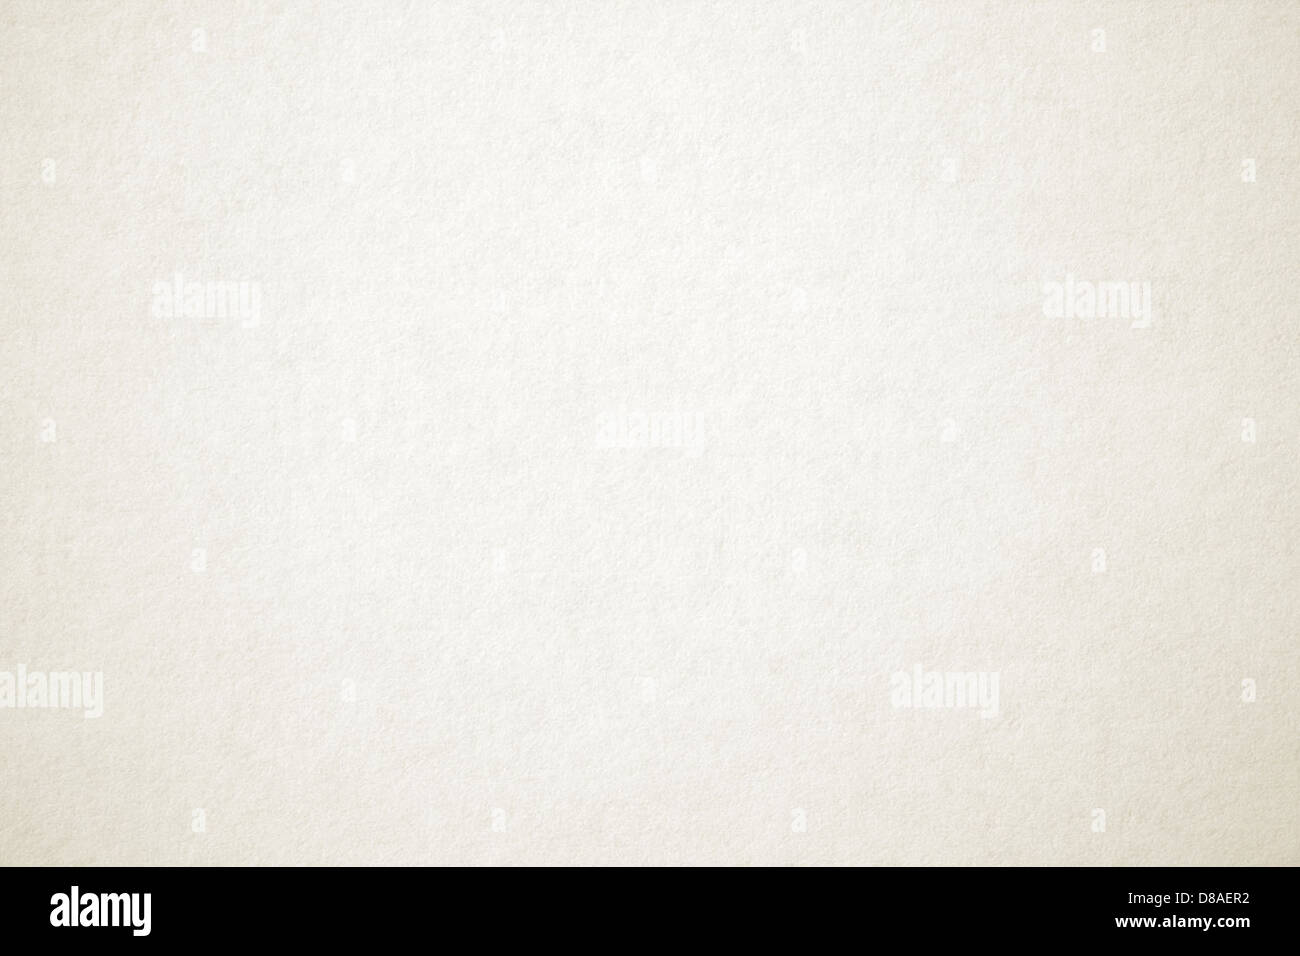 ivory off paper texture Stock - Alamy